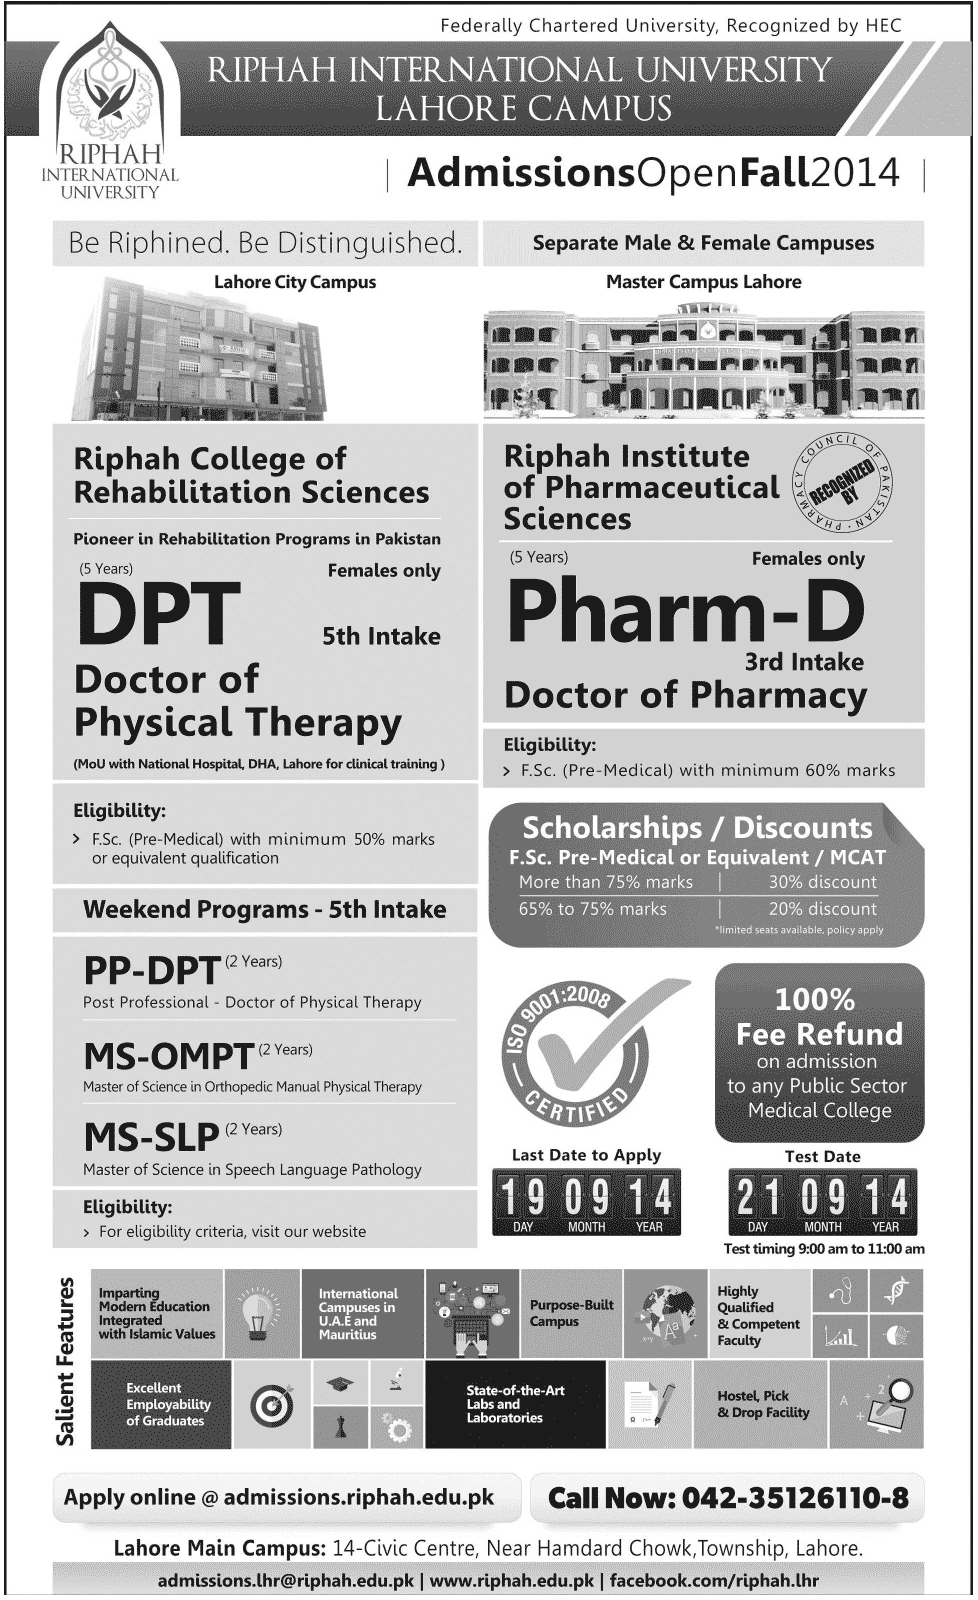 Riphah Institute of Pharmaceutical Sciences Lahore Admission Notice 2014 for Doctor of Pharmacy (Pharm-D)